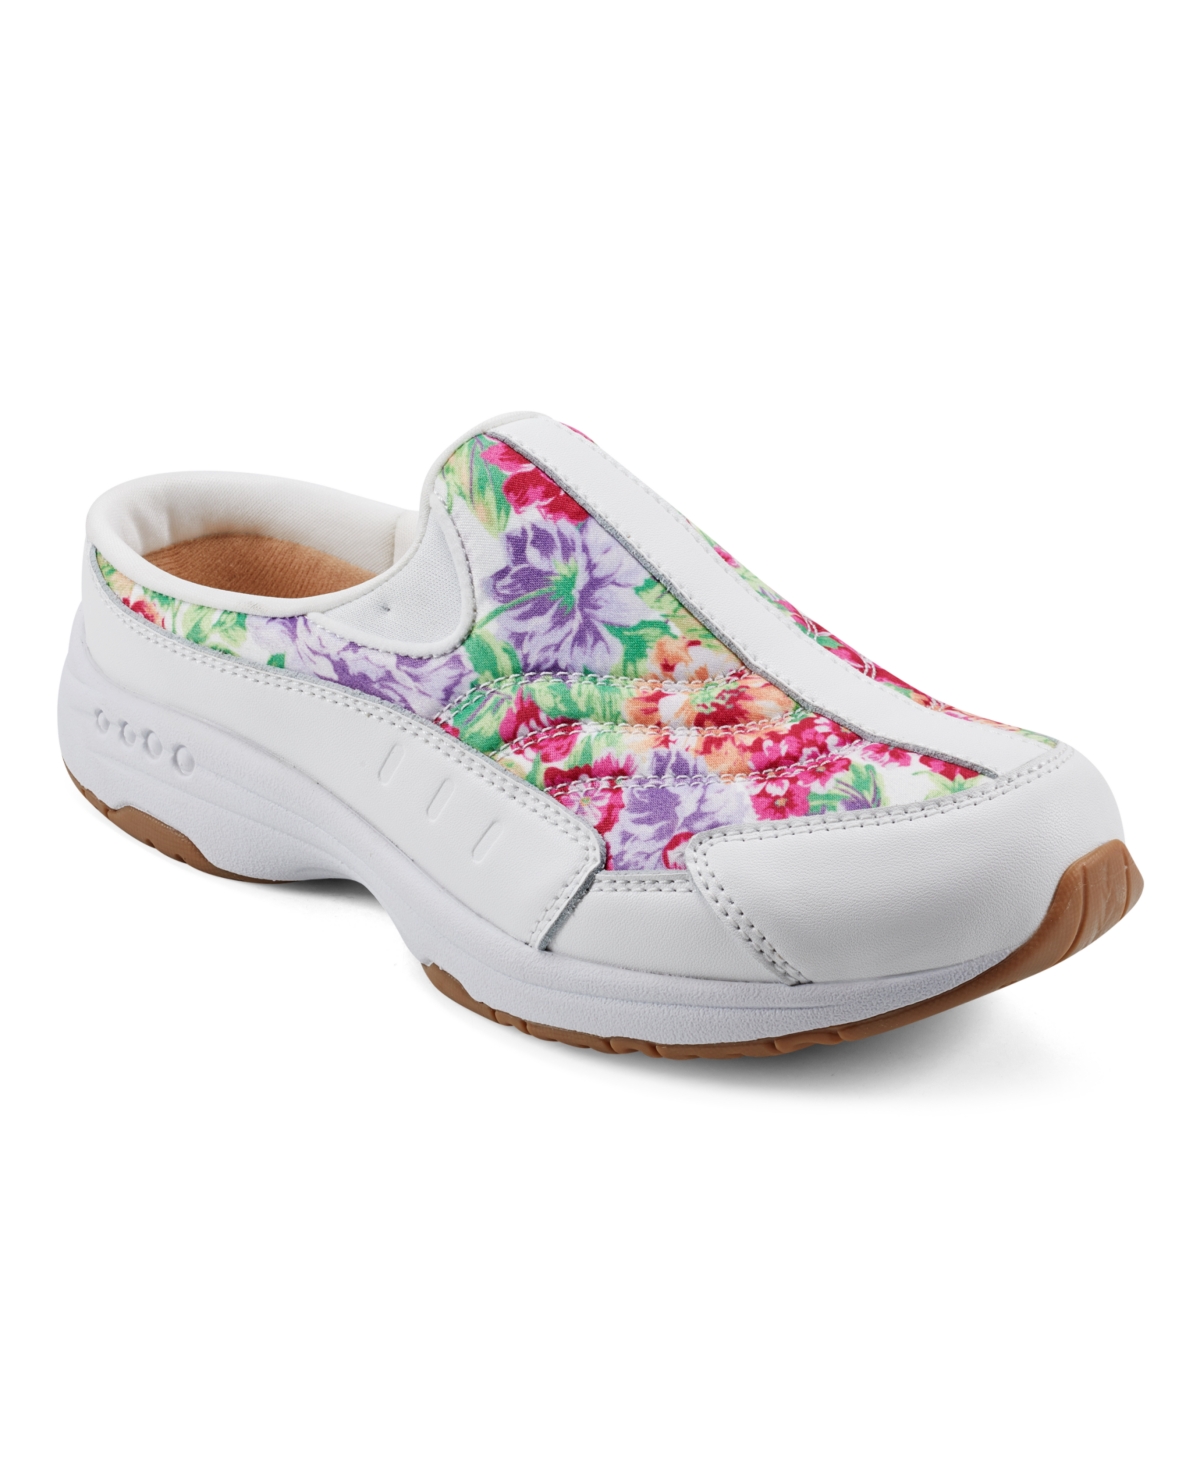 Easy Spirit Women's Traveltime Round Toe Casual Slip-on Mules In White,pink Floral Multi - Leather,text